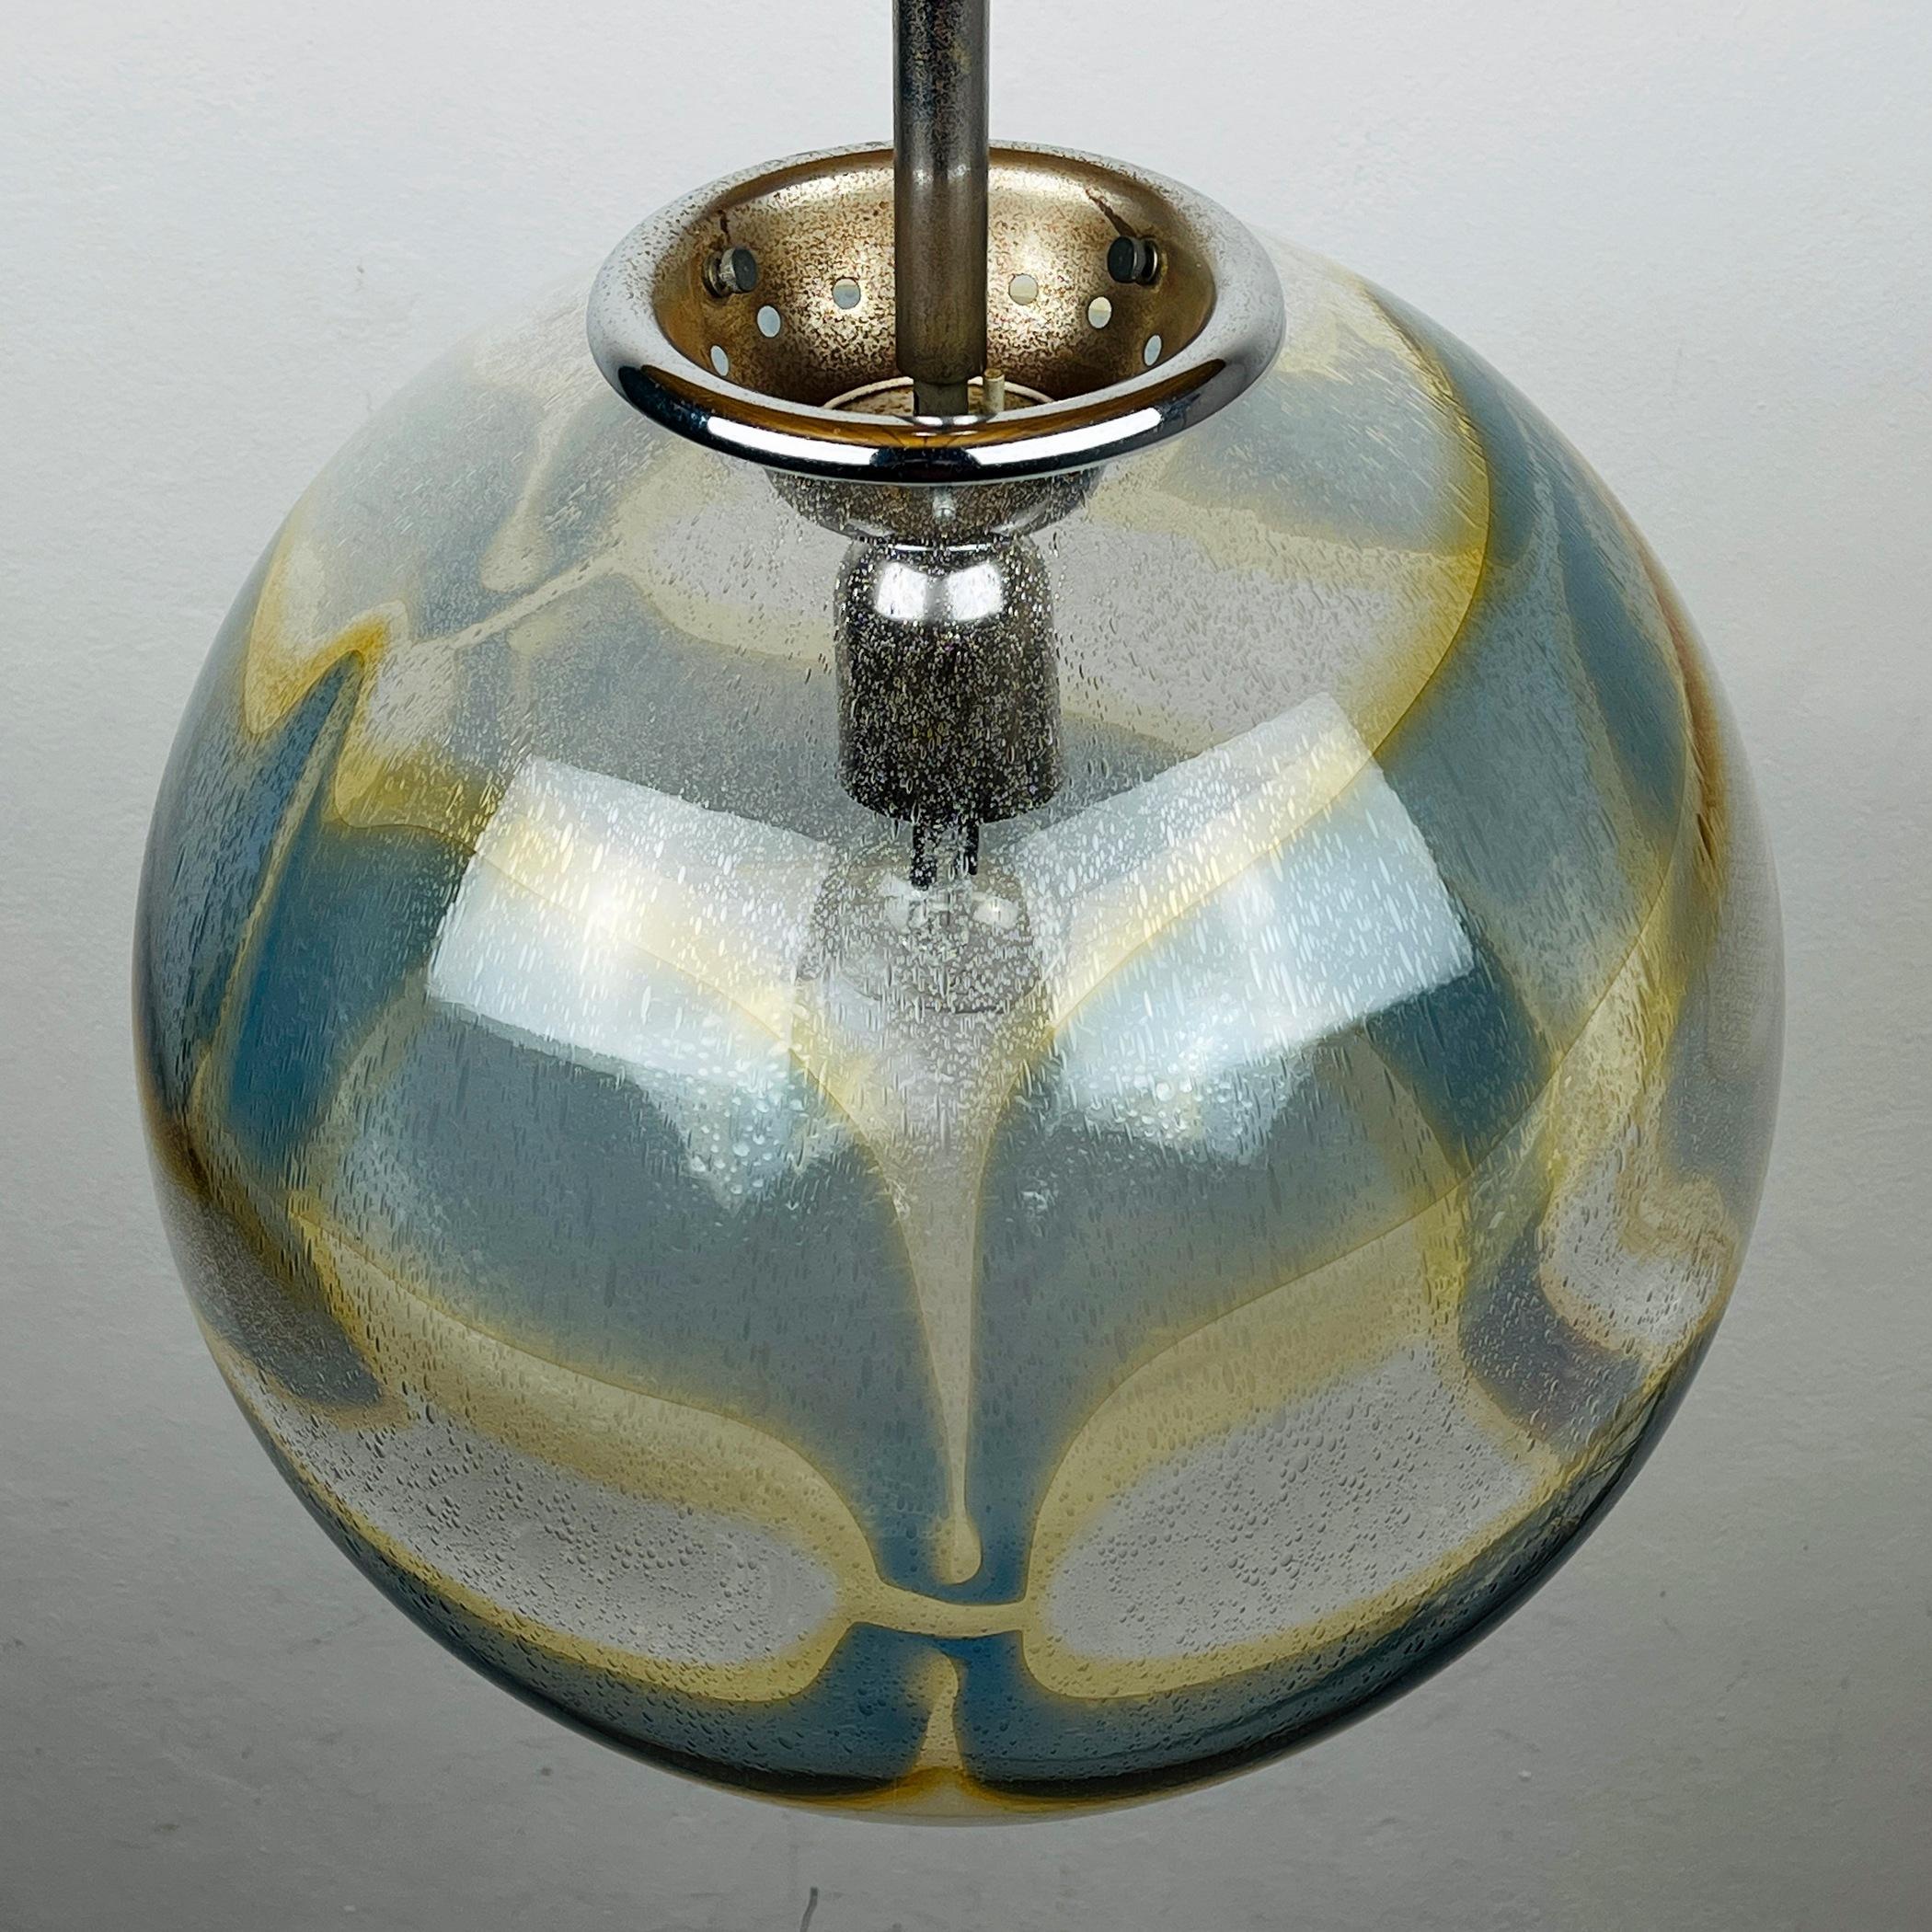 Vintage Xl Swirled Murano Glass Pendant Lamp by Vistosi Italy, 1970s For Sale 1